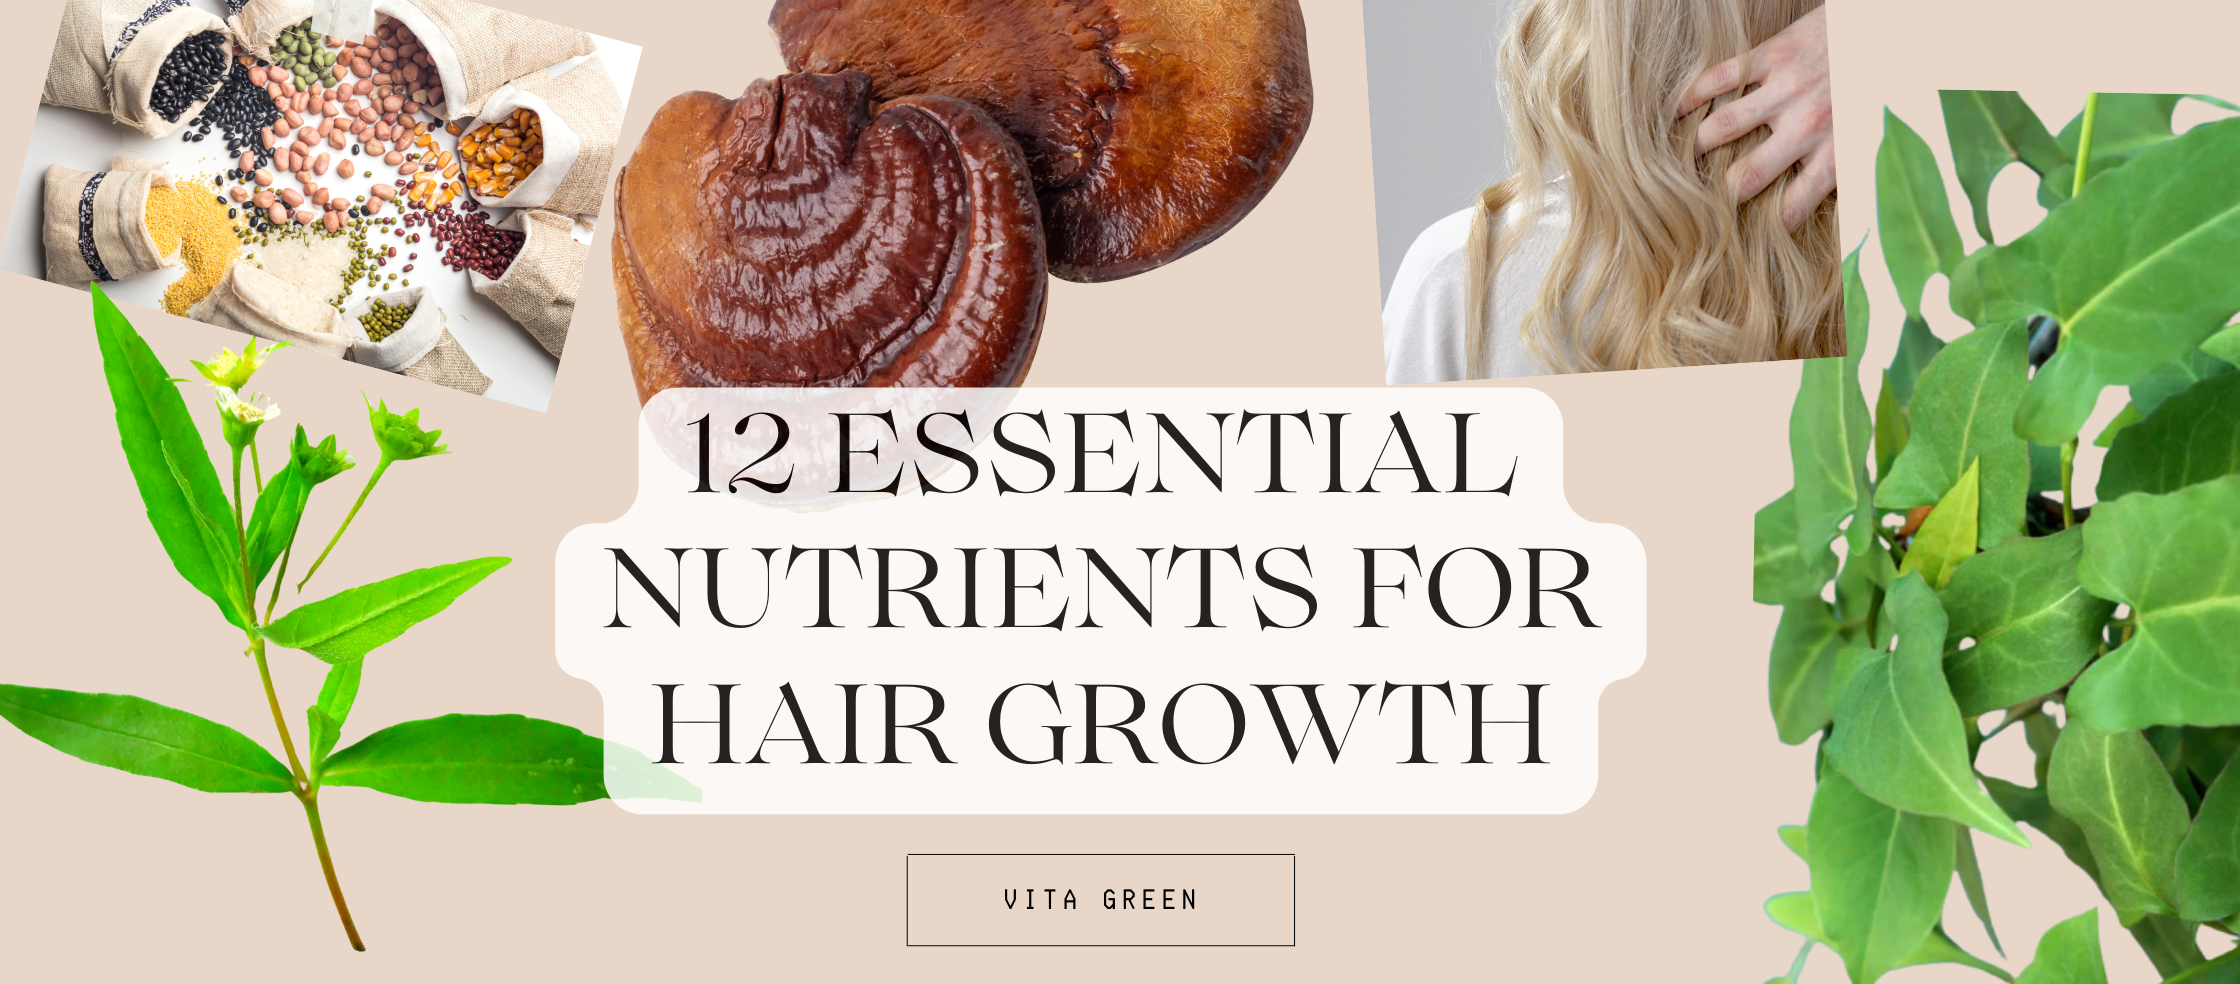 12 Essential Nutrients for Hair Growth